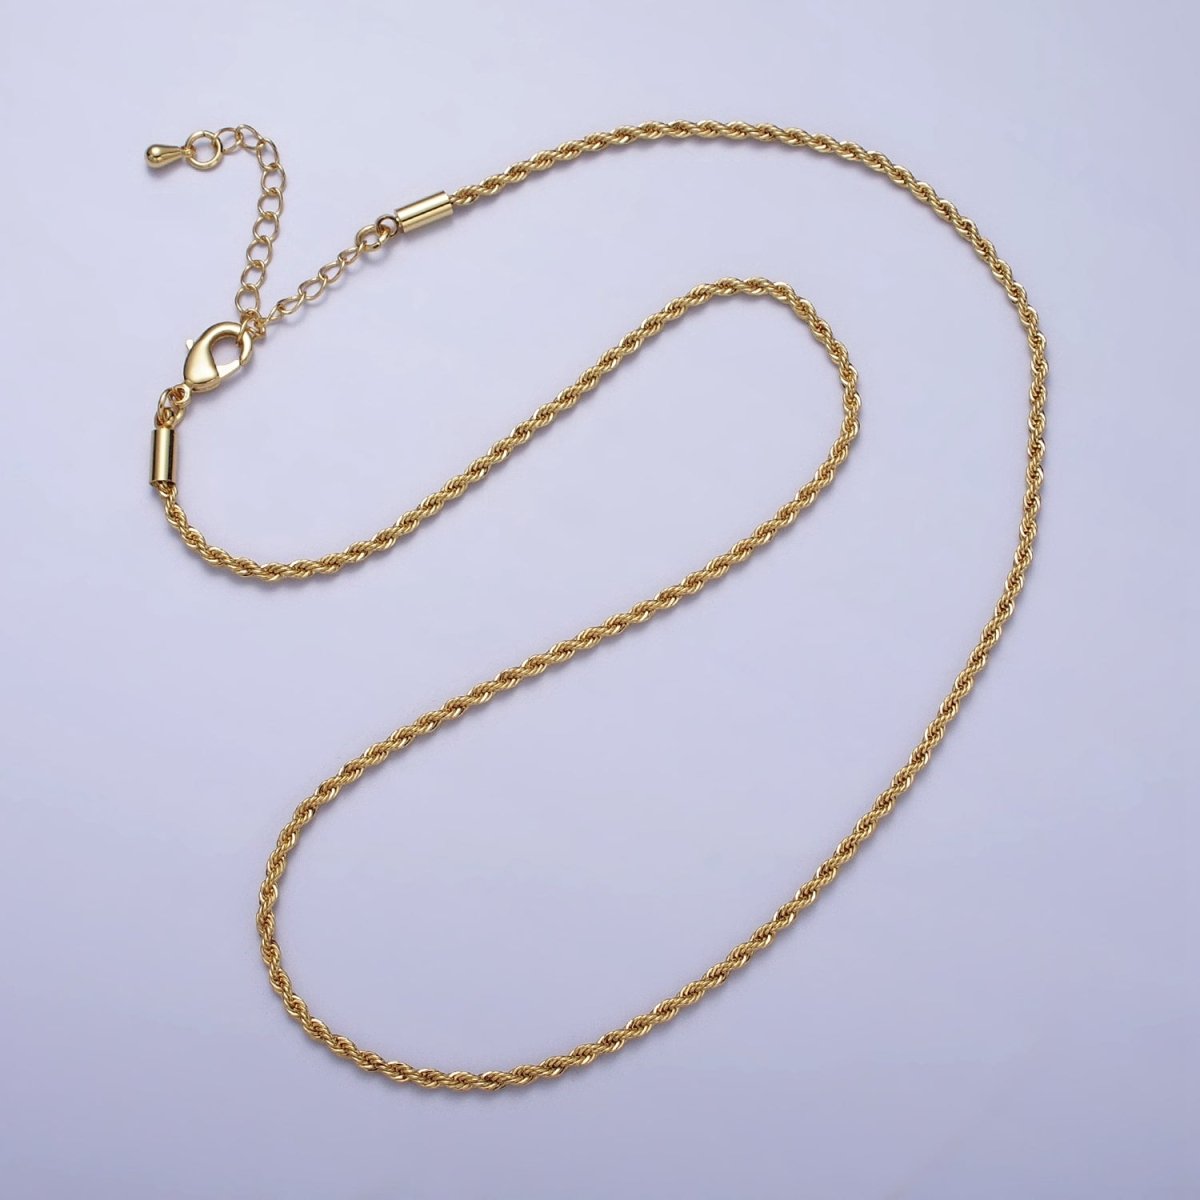 Dainty Gold Rope Chain Necklace Twisted Chain Necklace 17.75", 19.5 Inch + 2 inch Extender | WA-1524 WA-1525 - DLUXCA